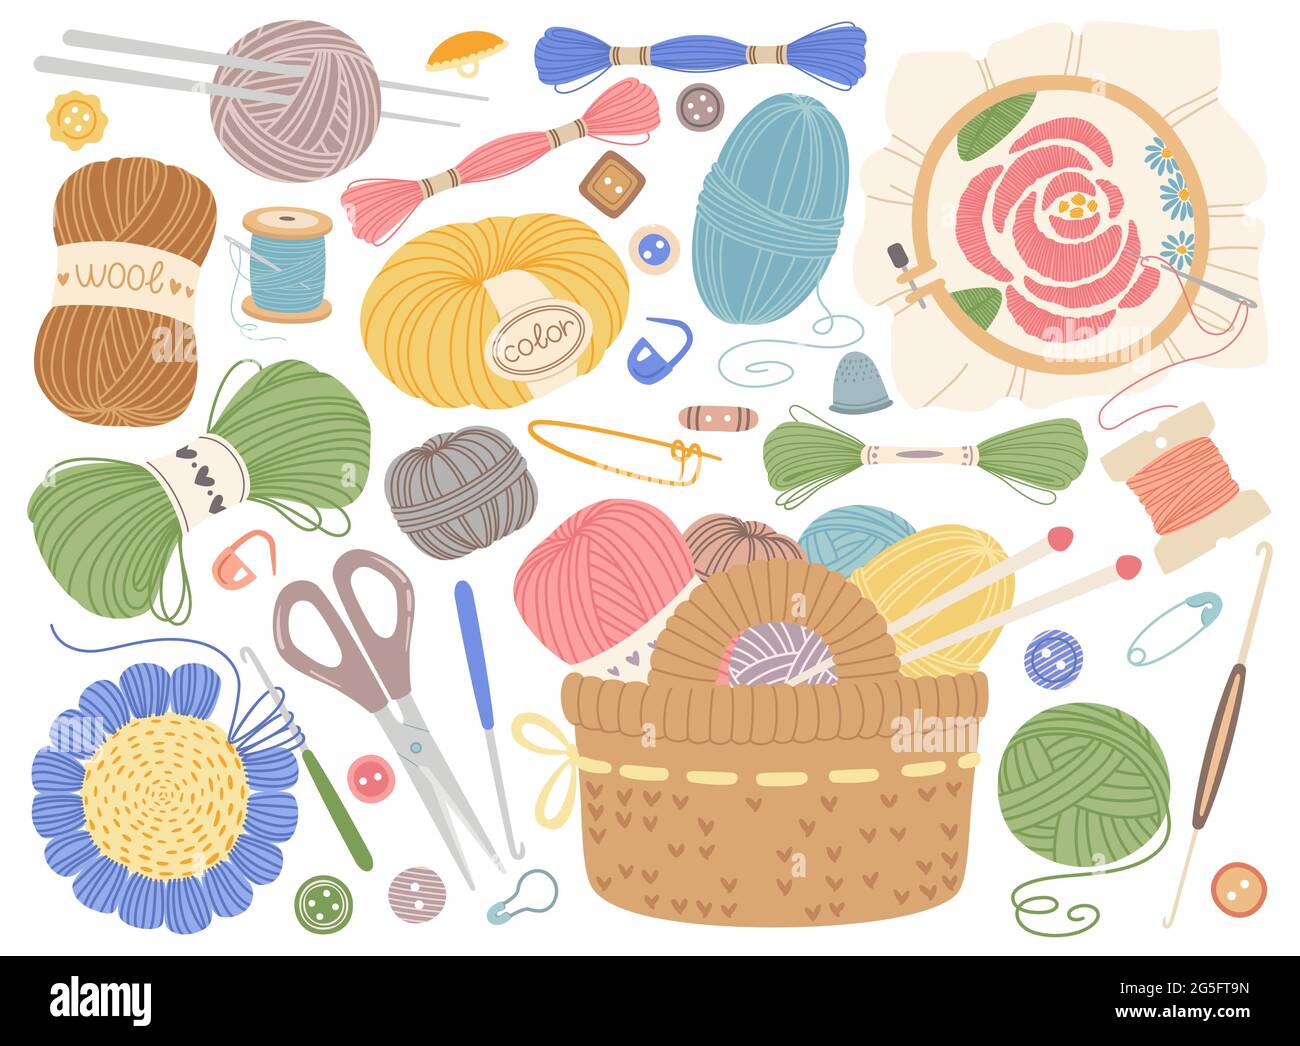 Free Clipart Knitting Needles And Sewing Items